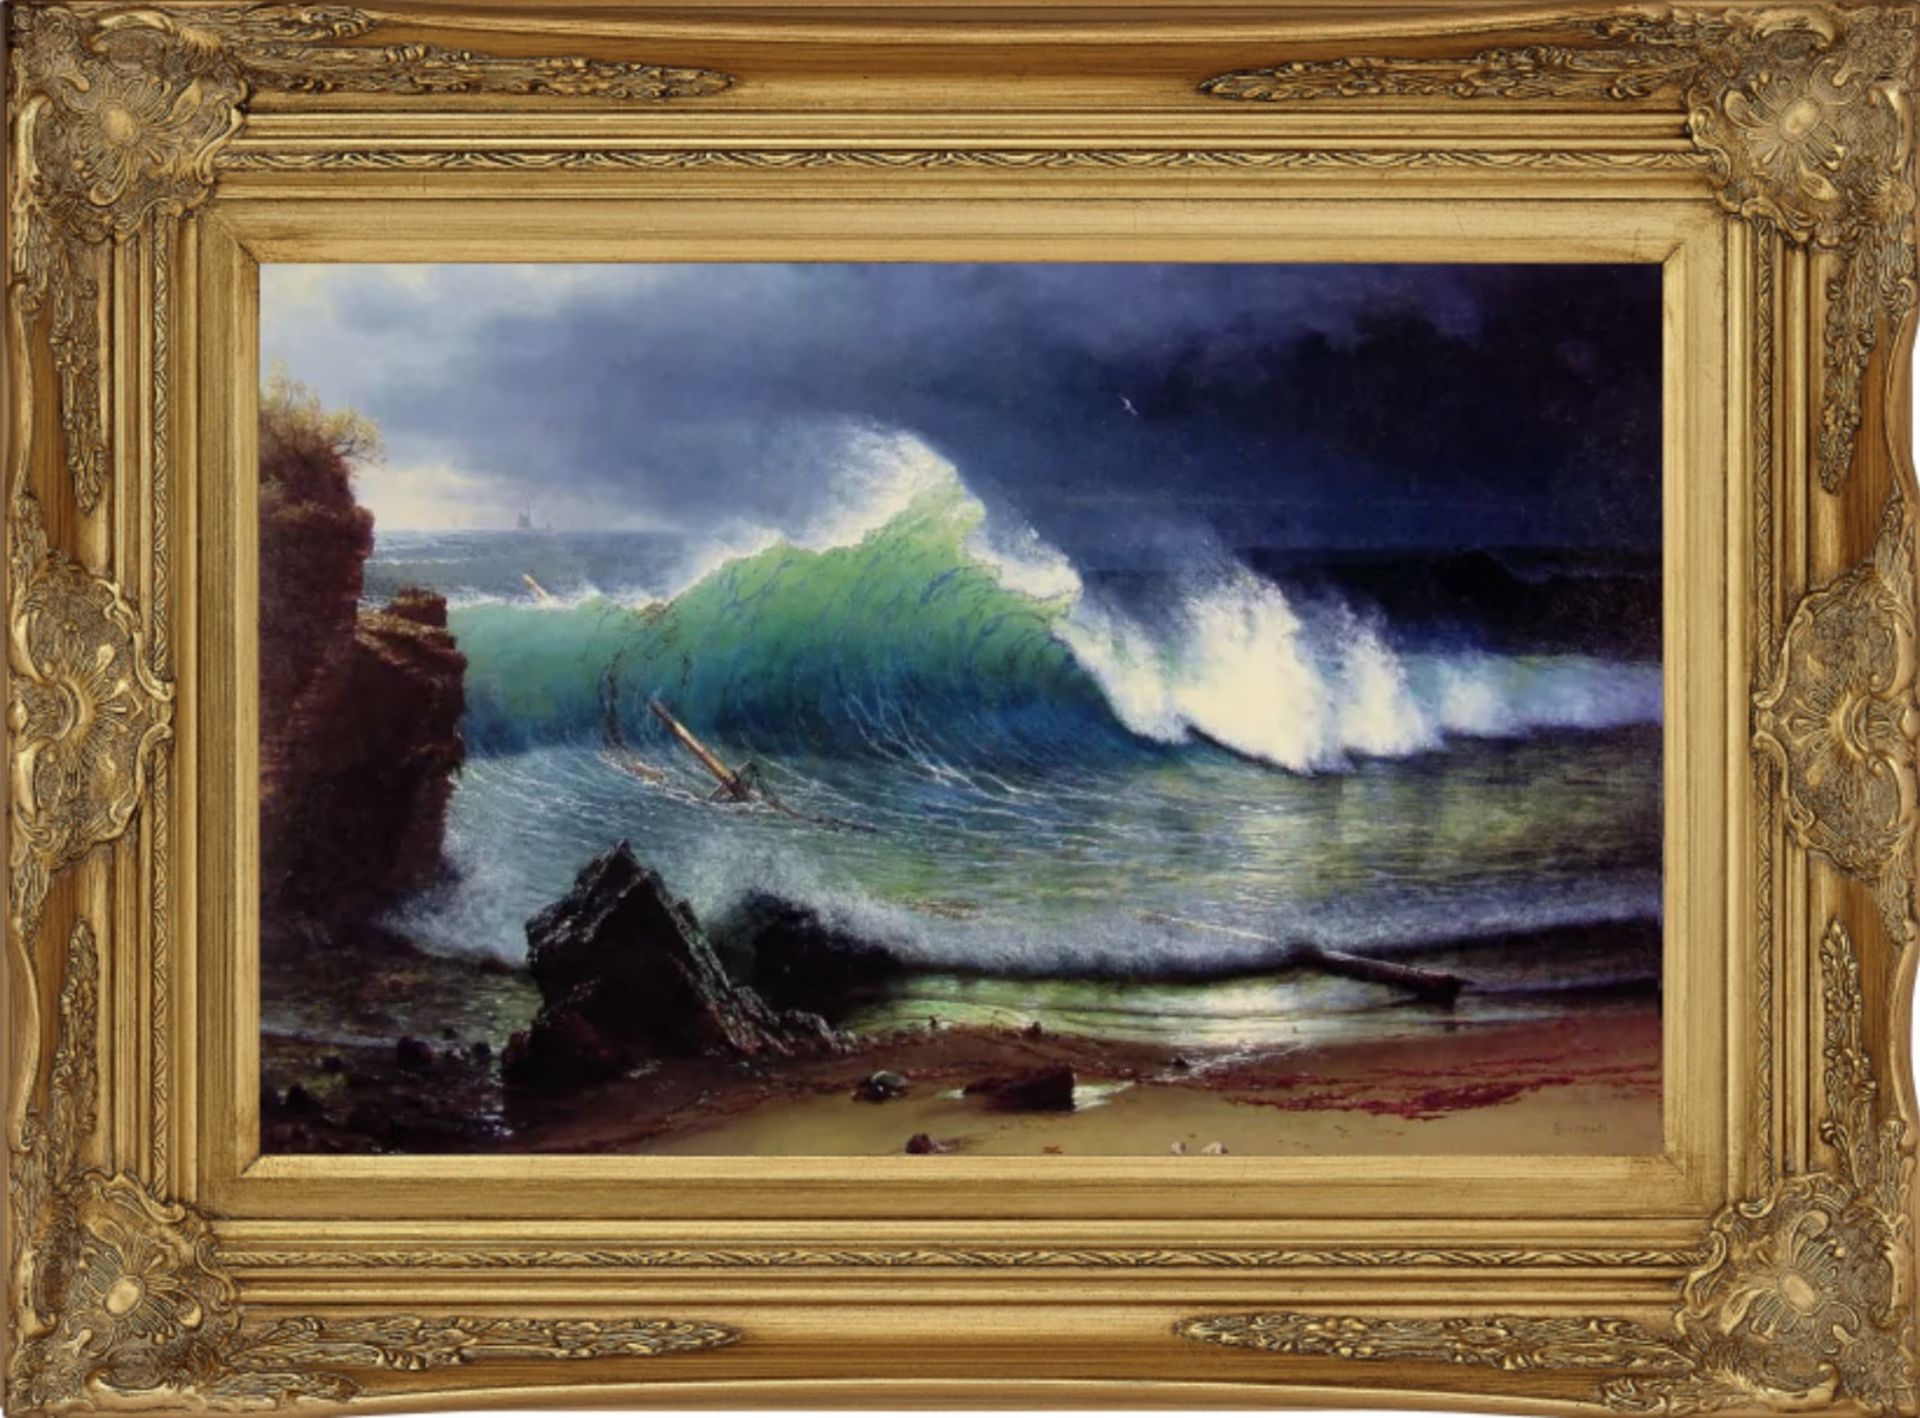 Albert Bierstadt "The Shore of the Turquoise Sea" Oil Painting